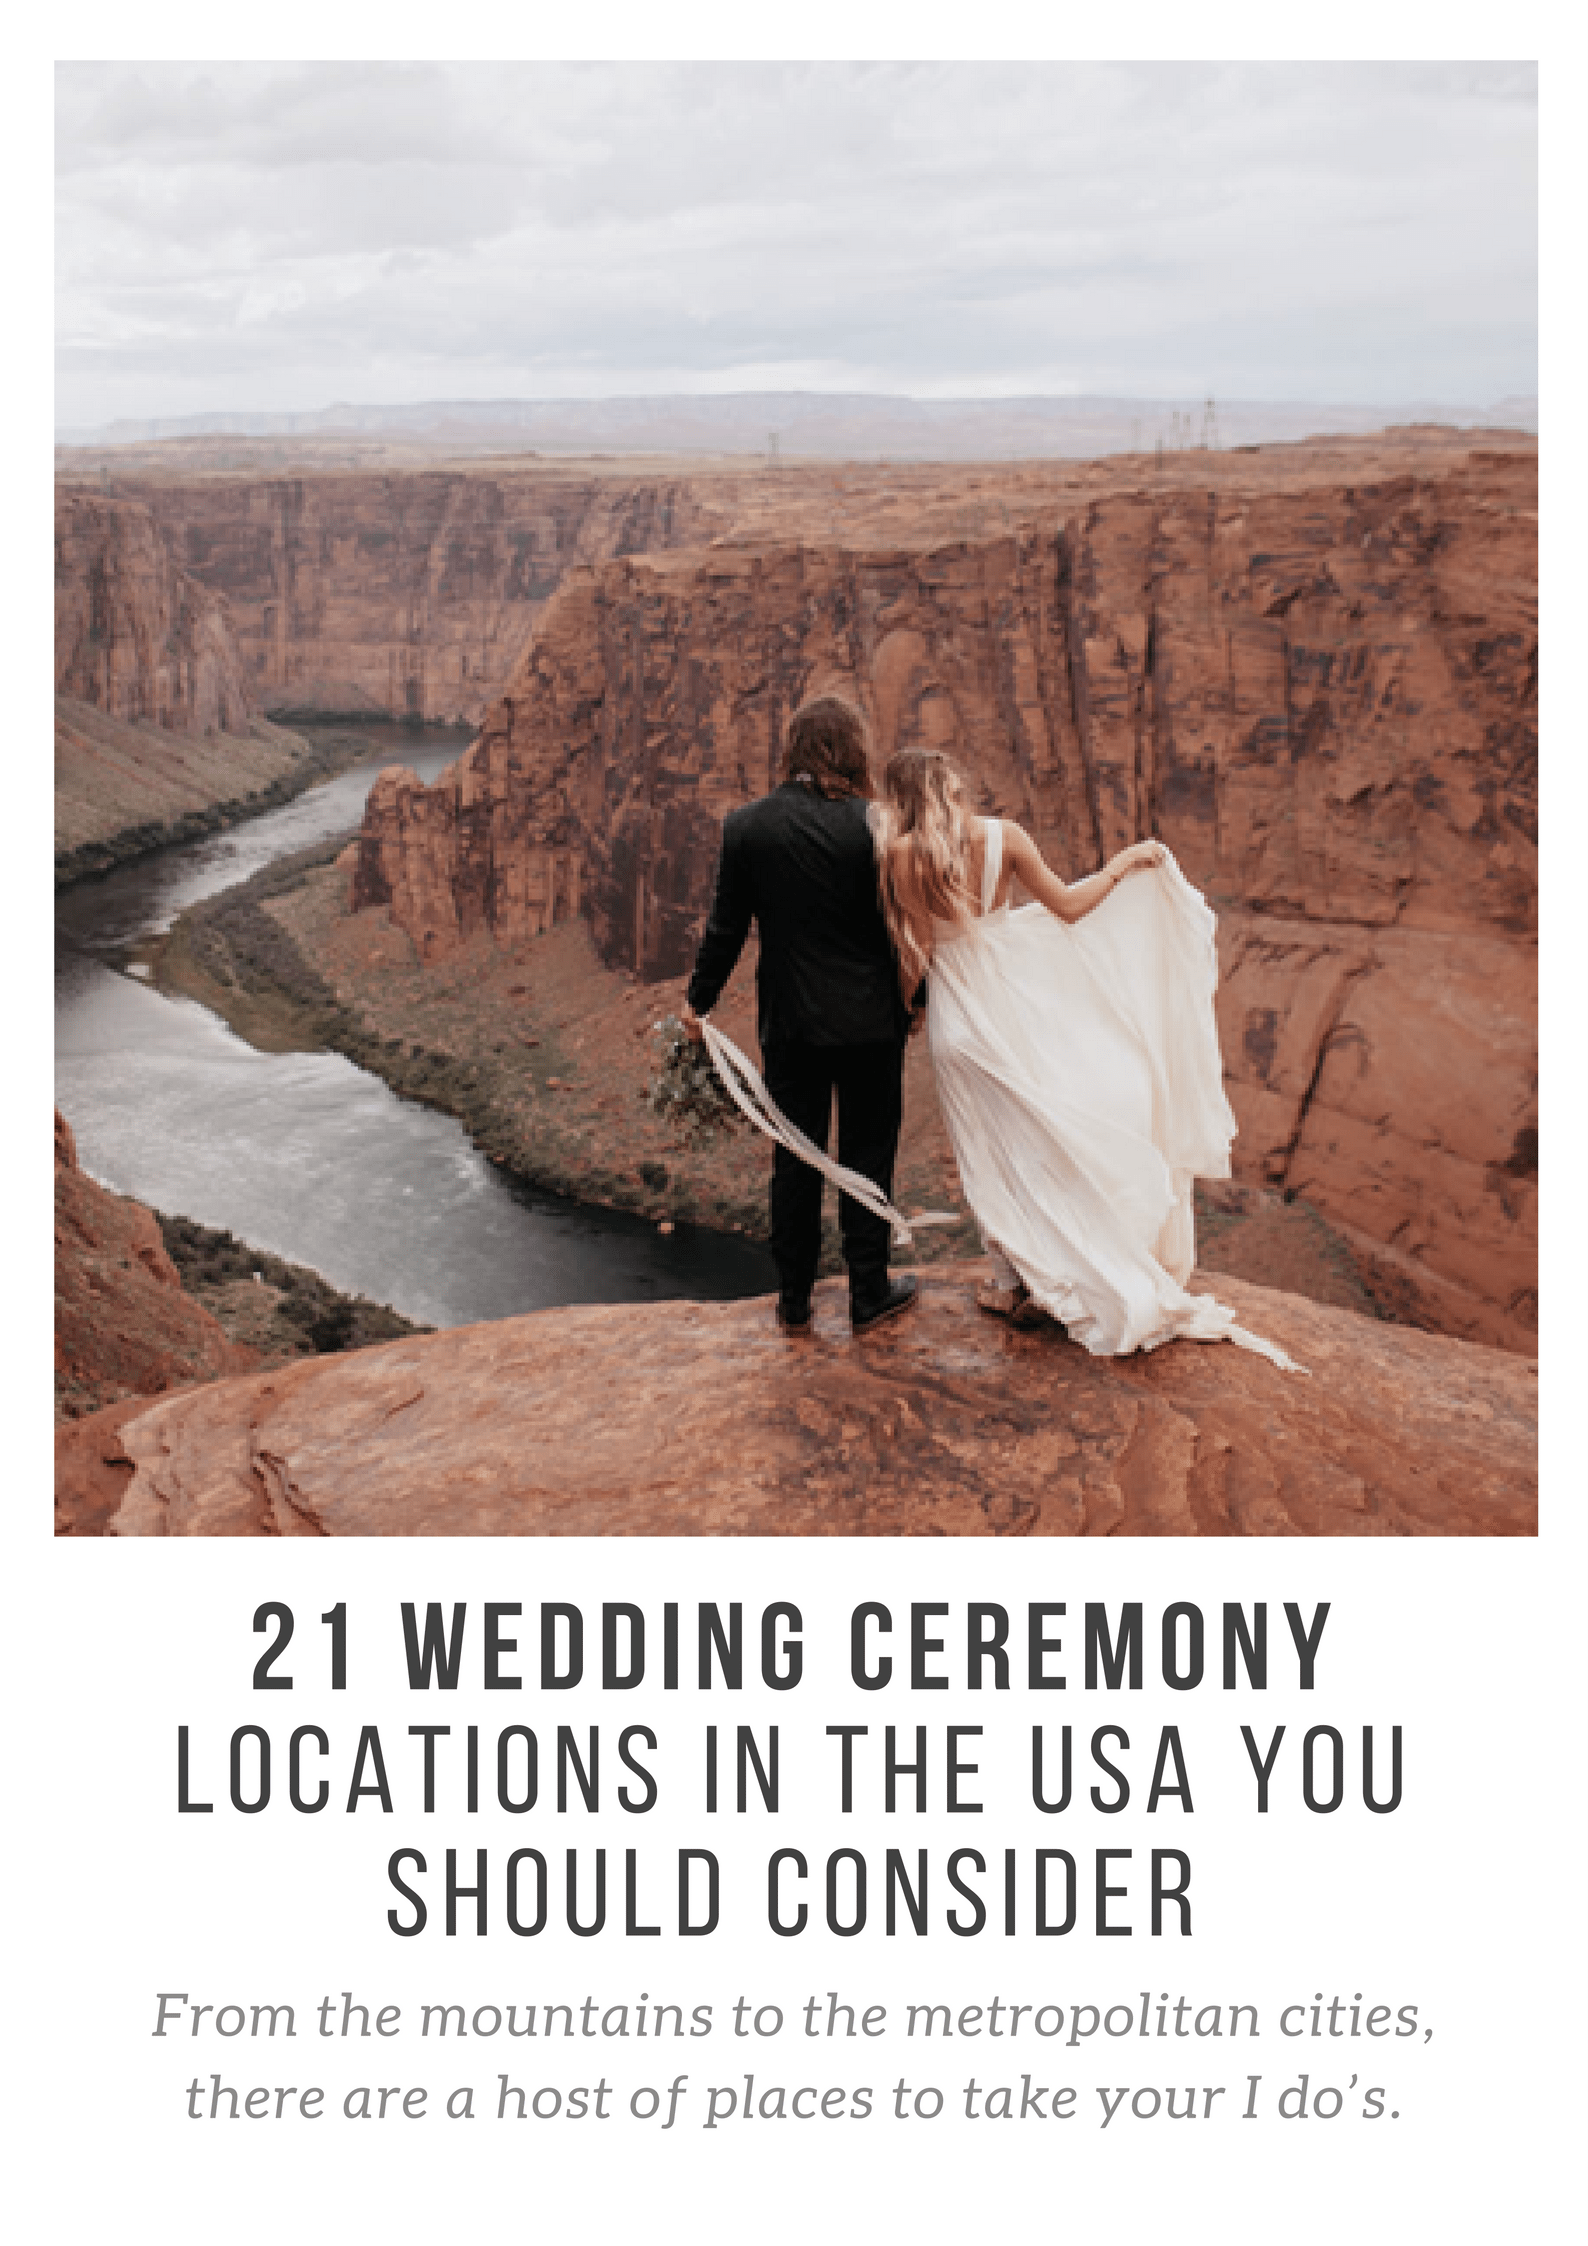 21 Wedding Ceremony Locations in the USA You Should Consider - 1